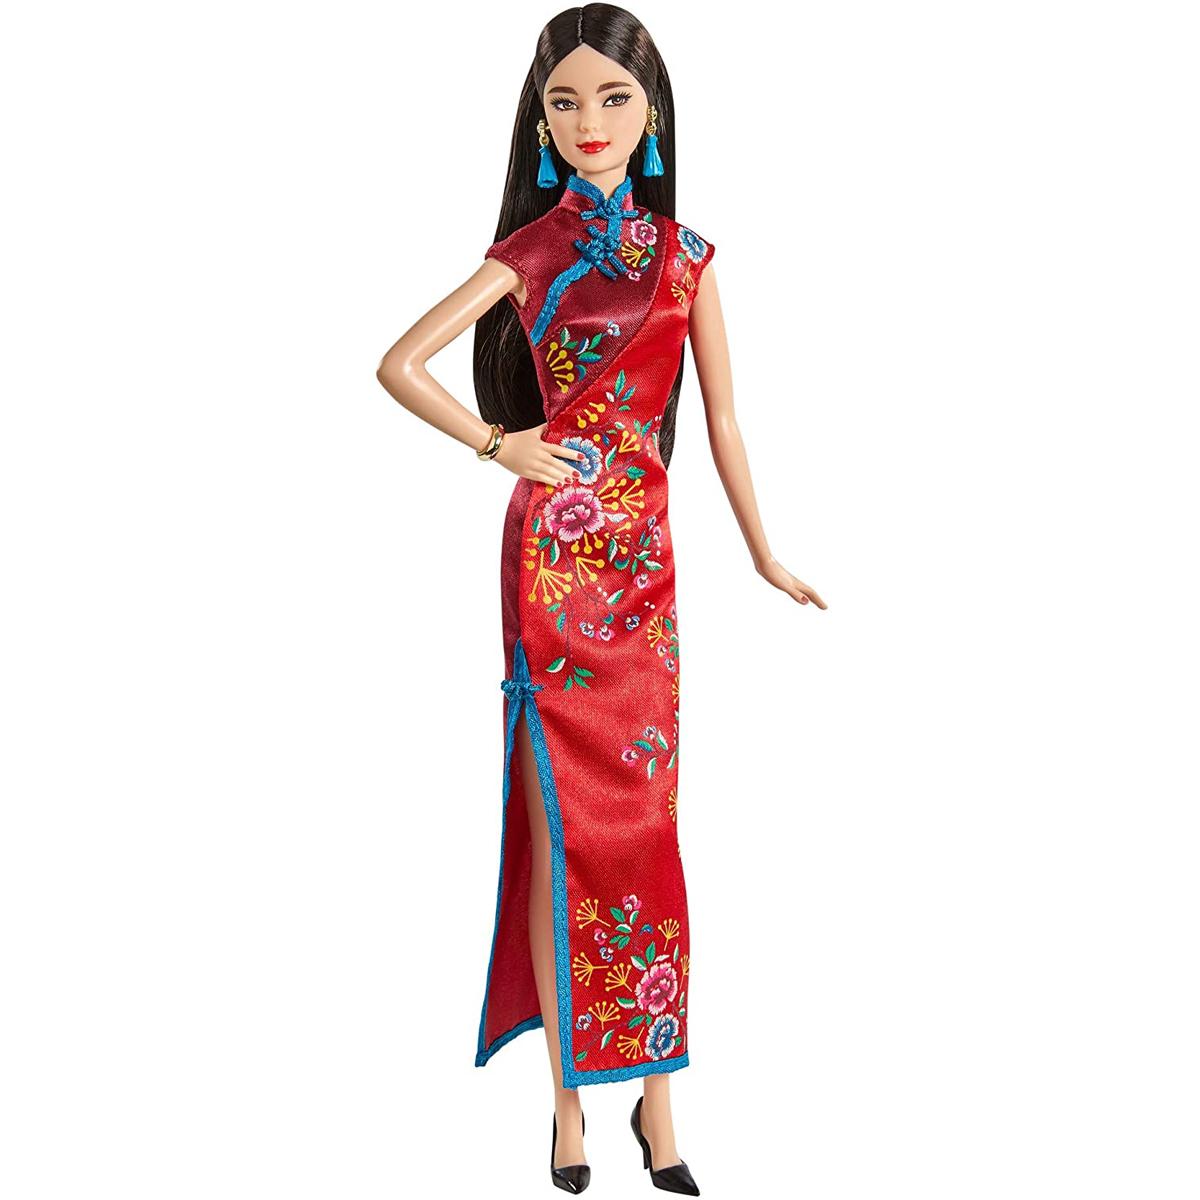 Barbie Signature Lunar New Year Collectors Doll for $24.66